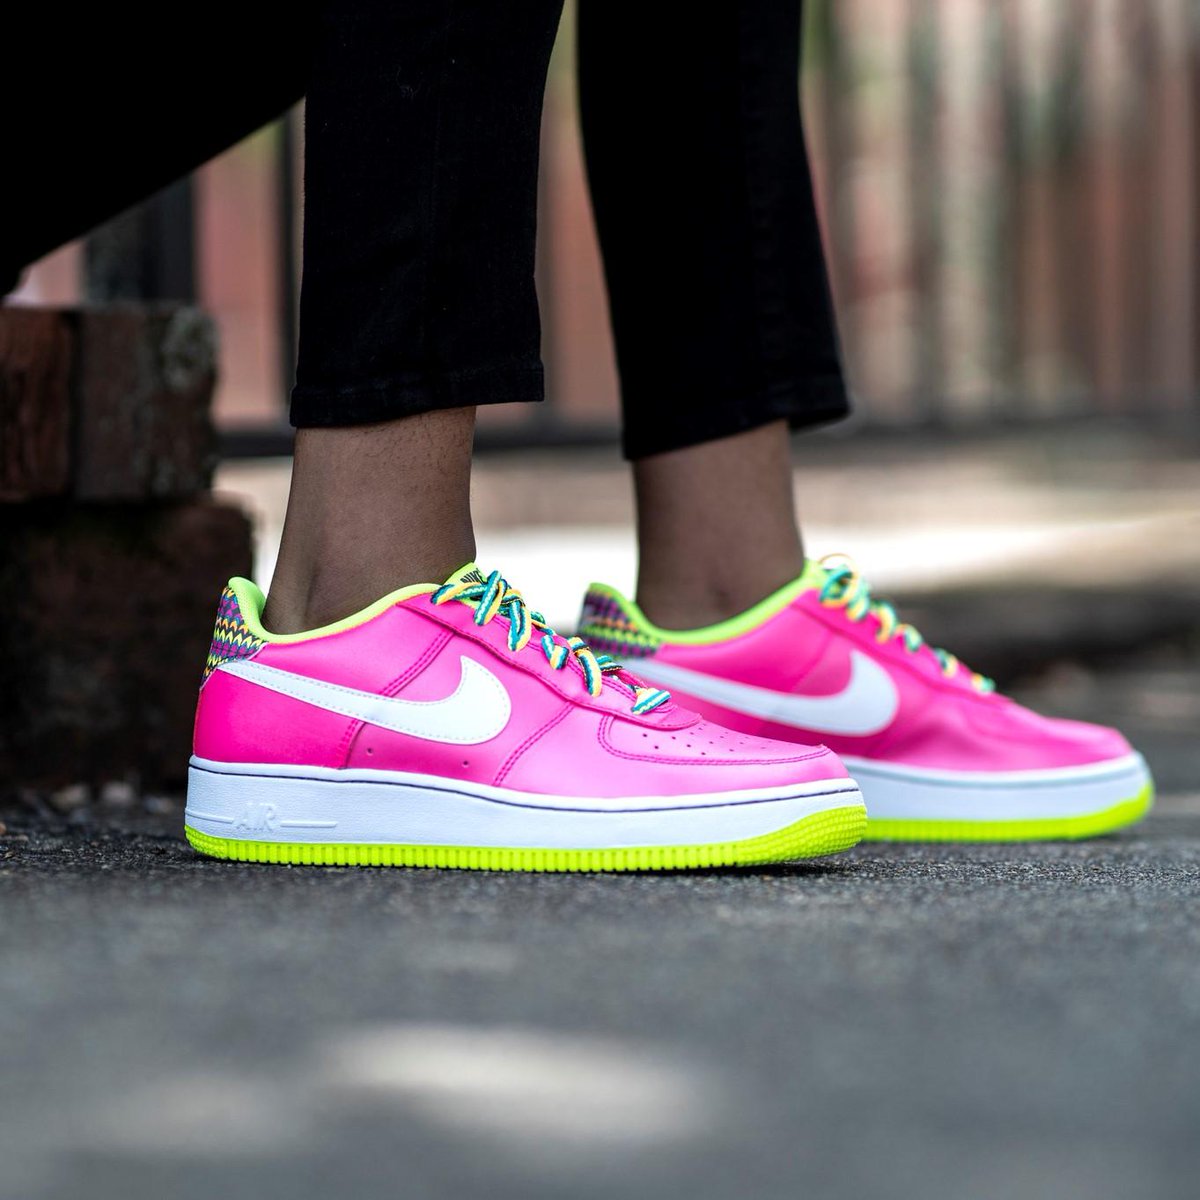 City Gear on X: Neon Nike. Pick up the girls Air Force 1